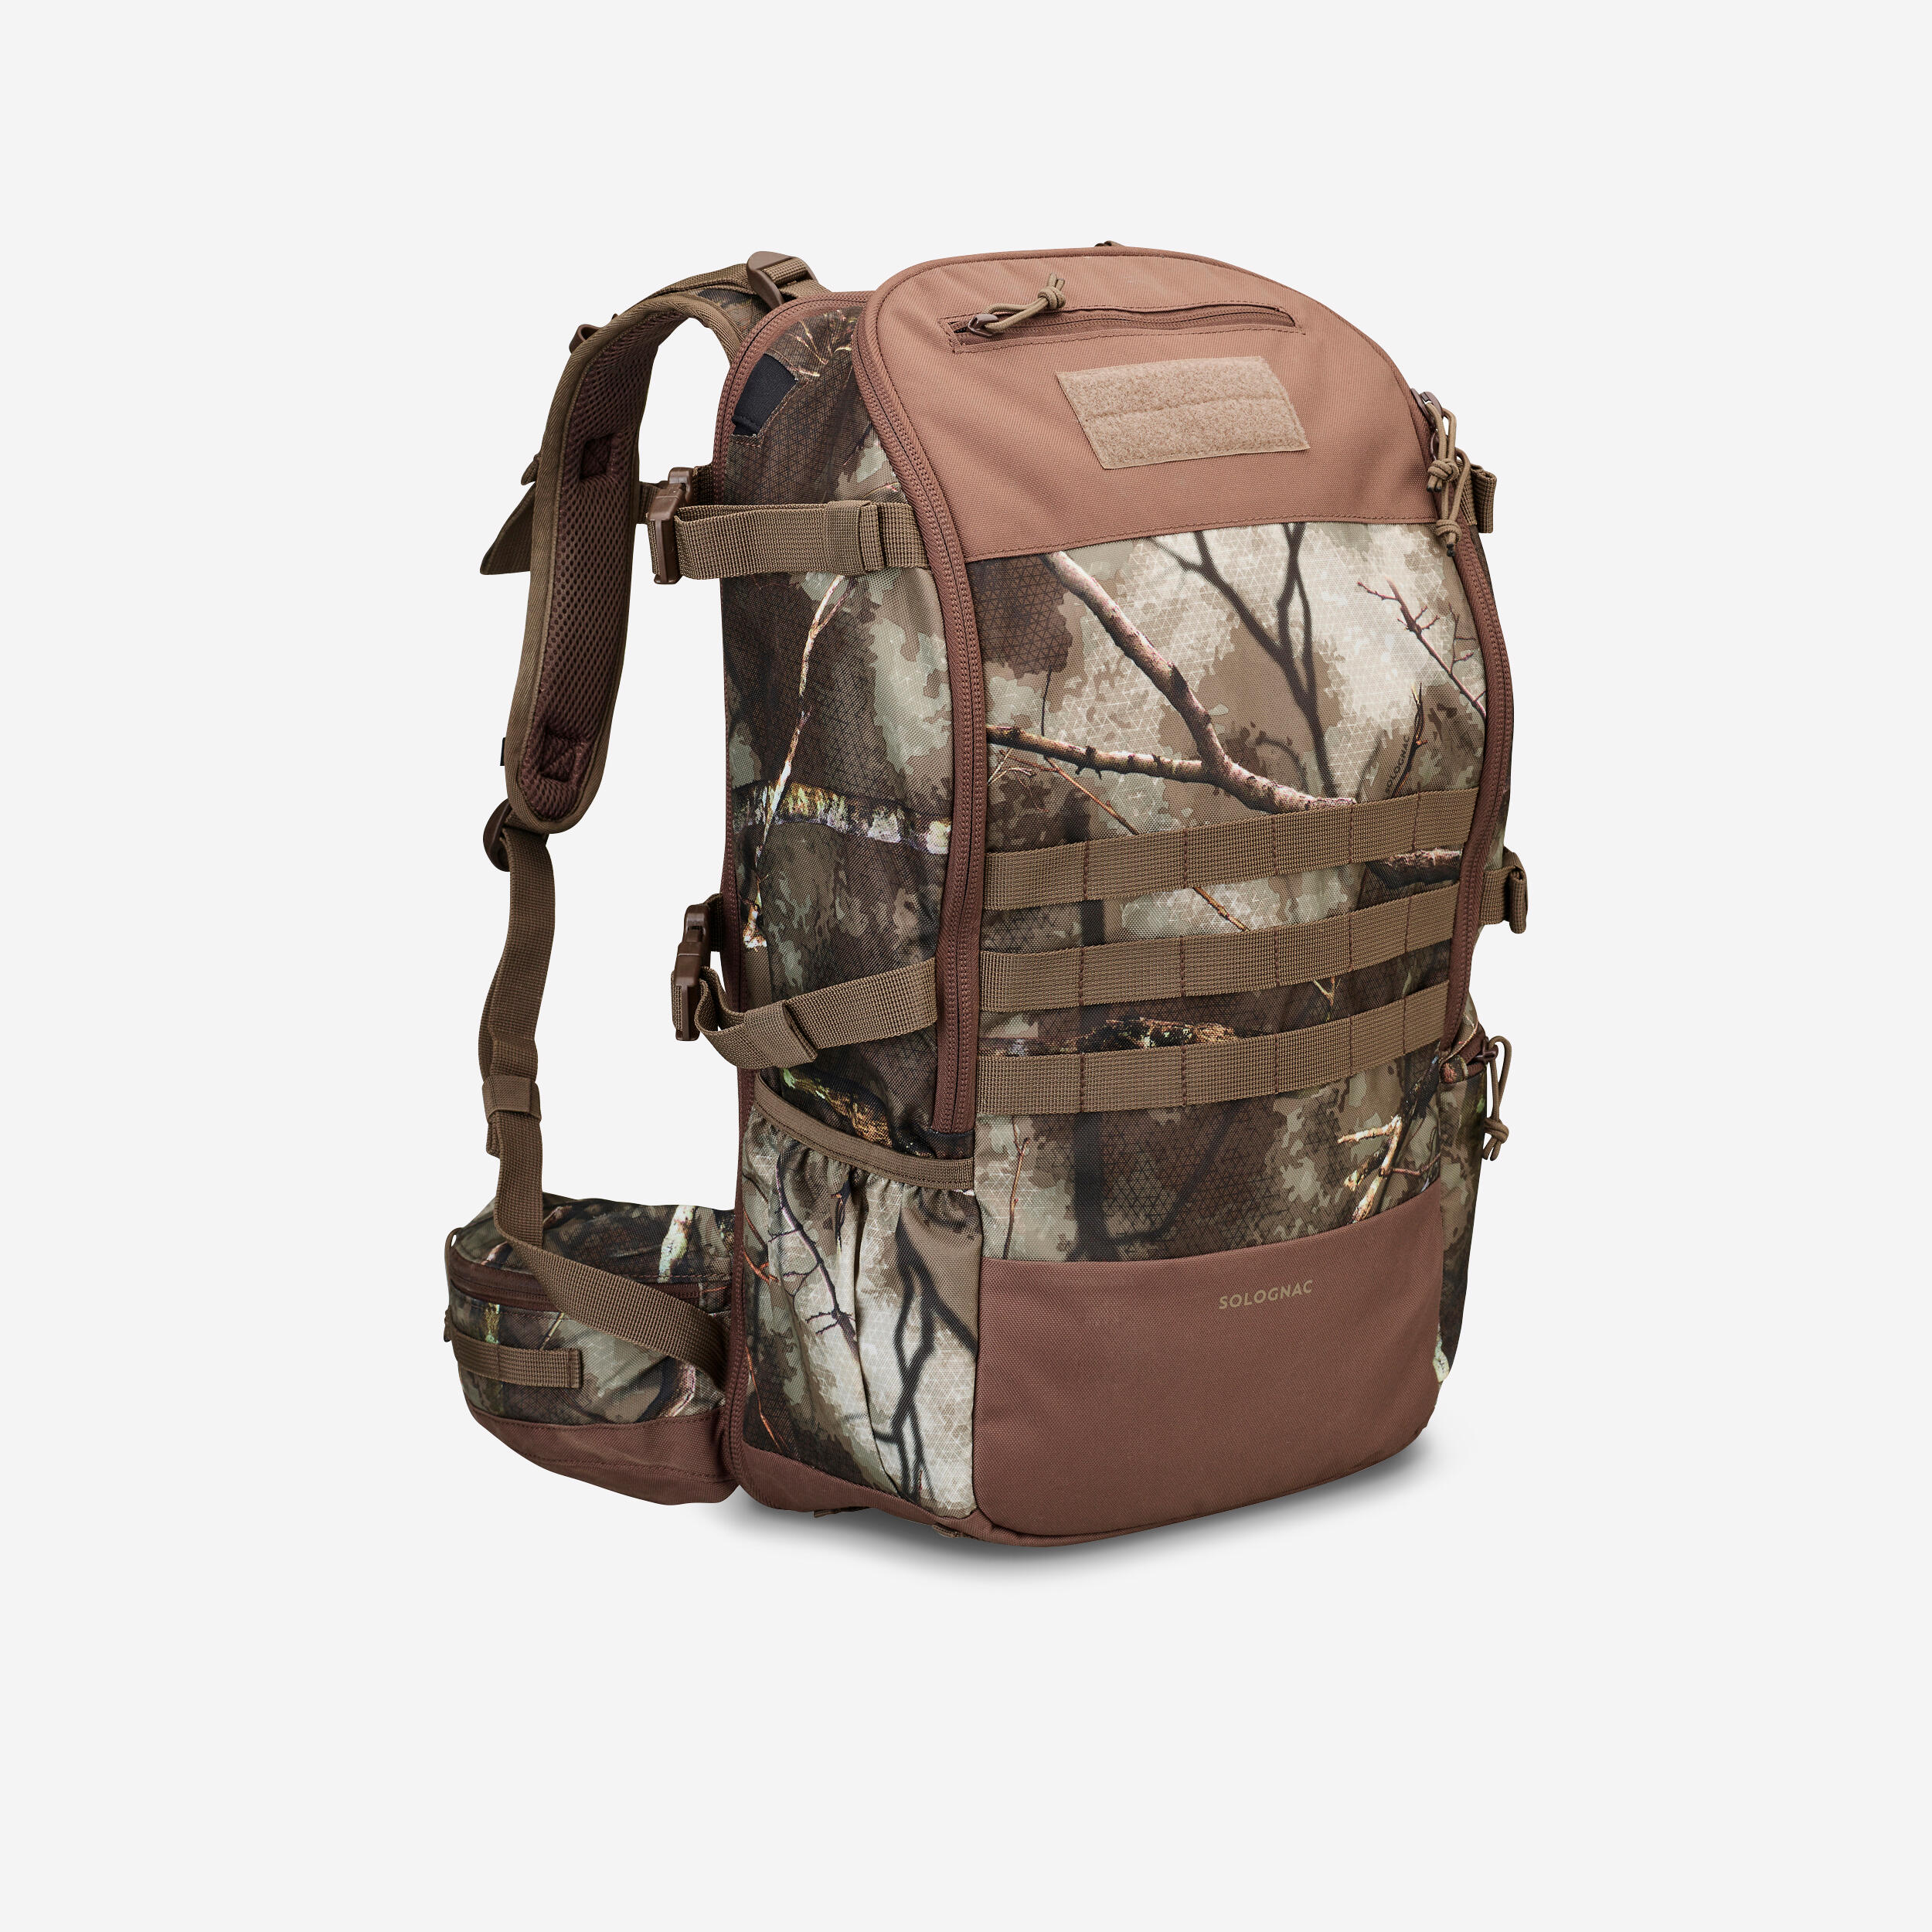 sac a dos chasse x-access 45 litres compact camouflage treemetic - solognac